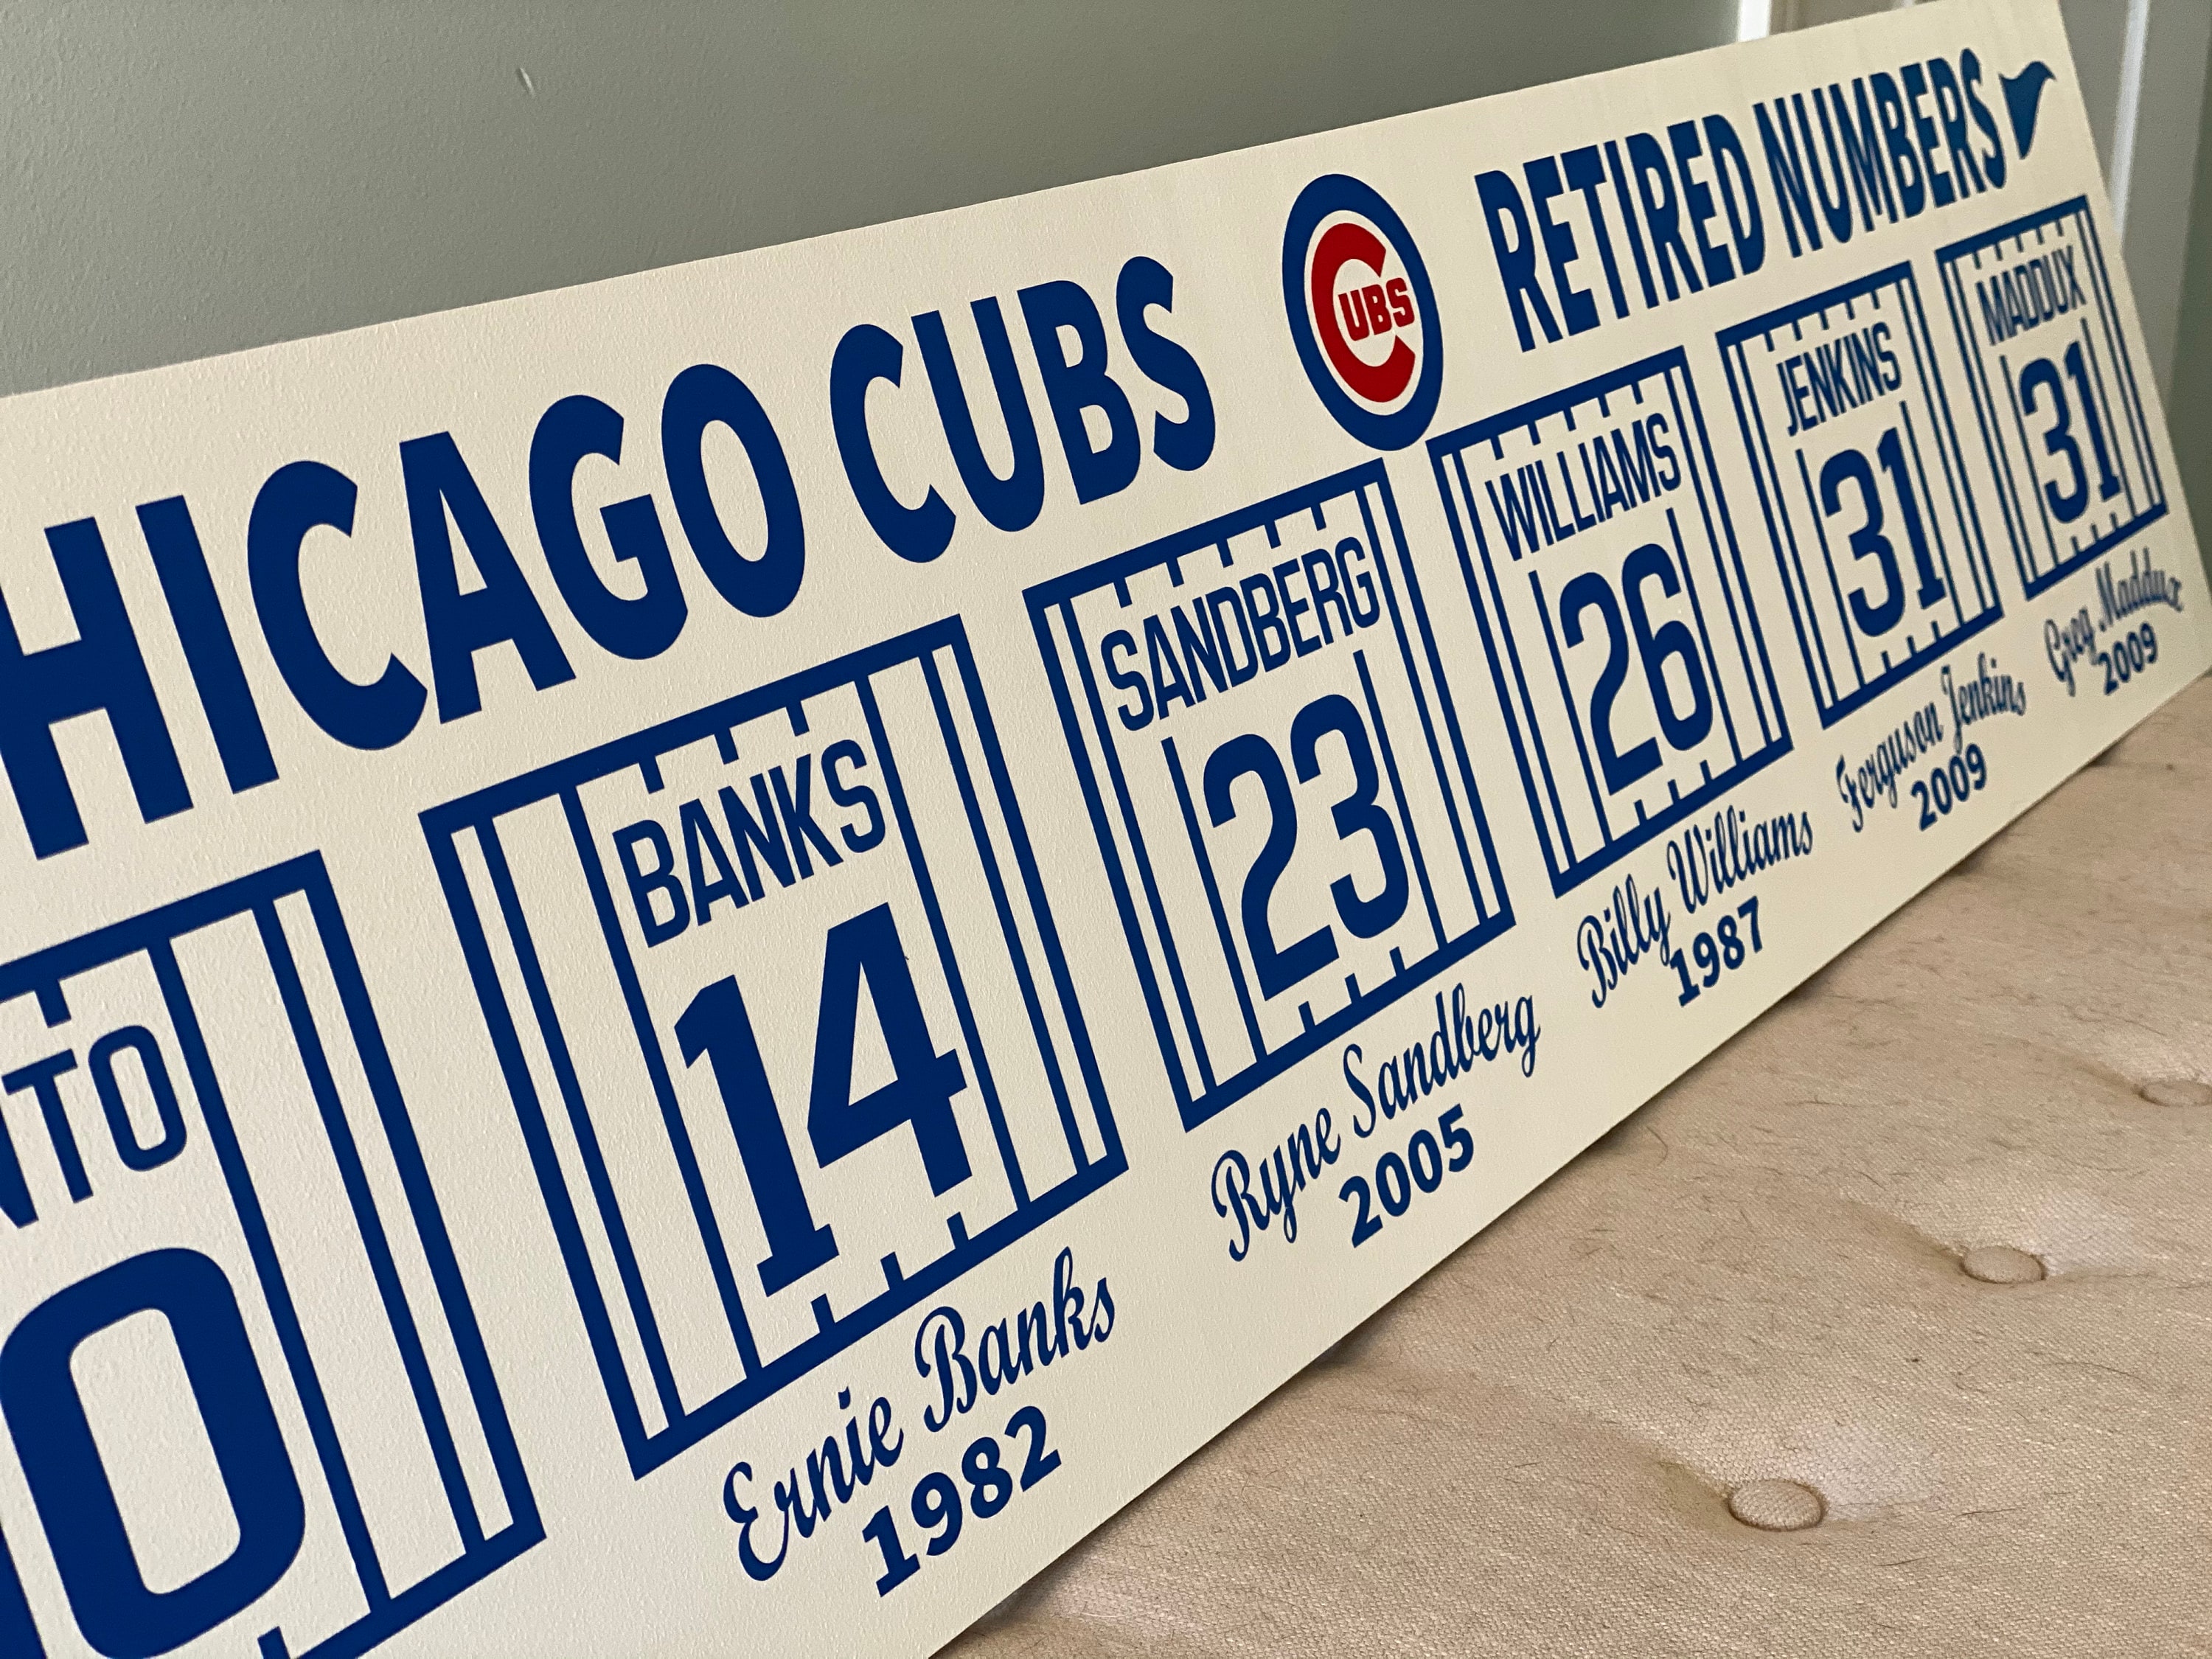 Chicago Cubs Retired Numbers Collectible Sign Memorabilia MLB 